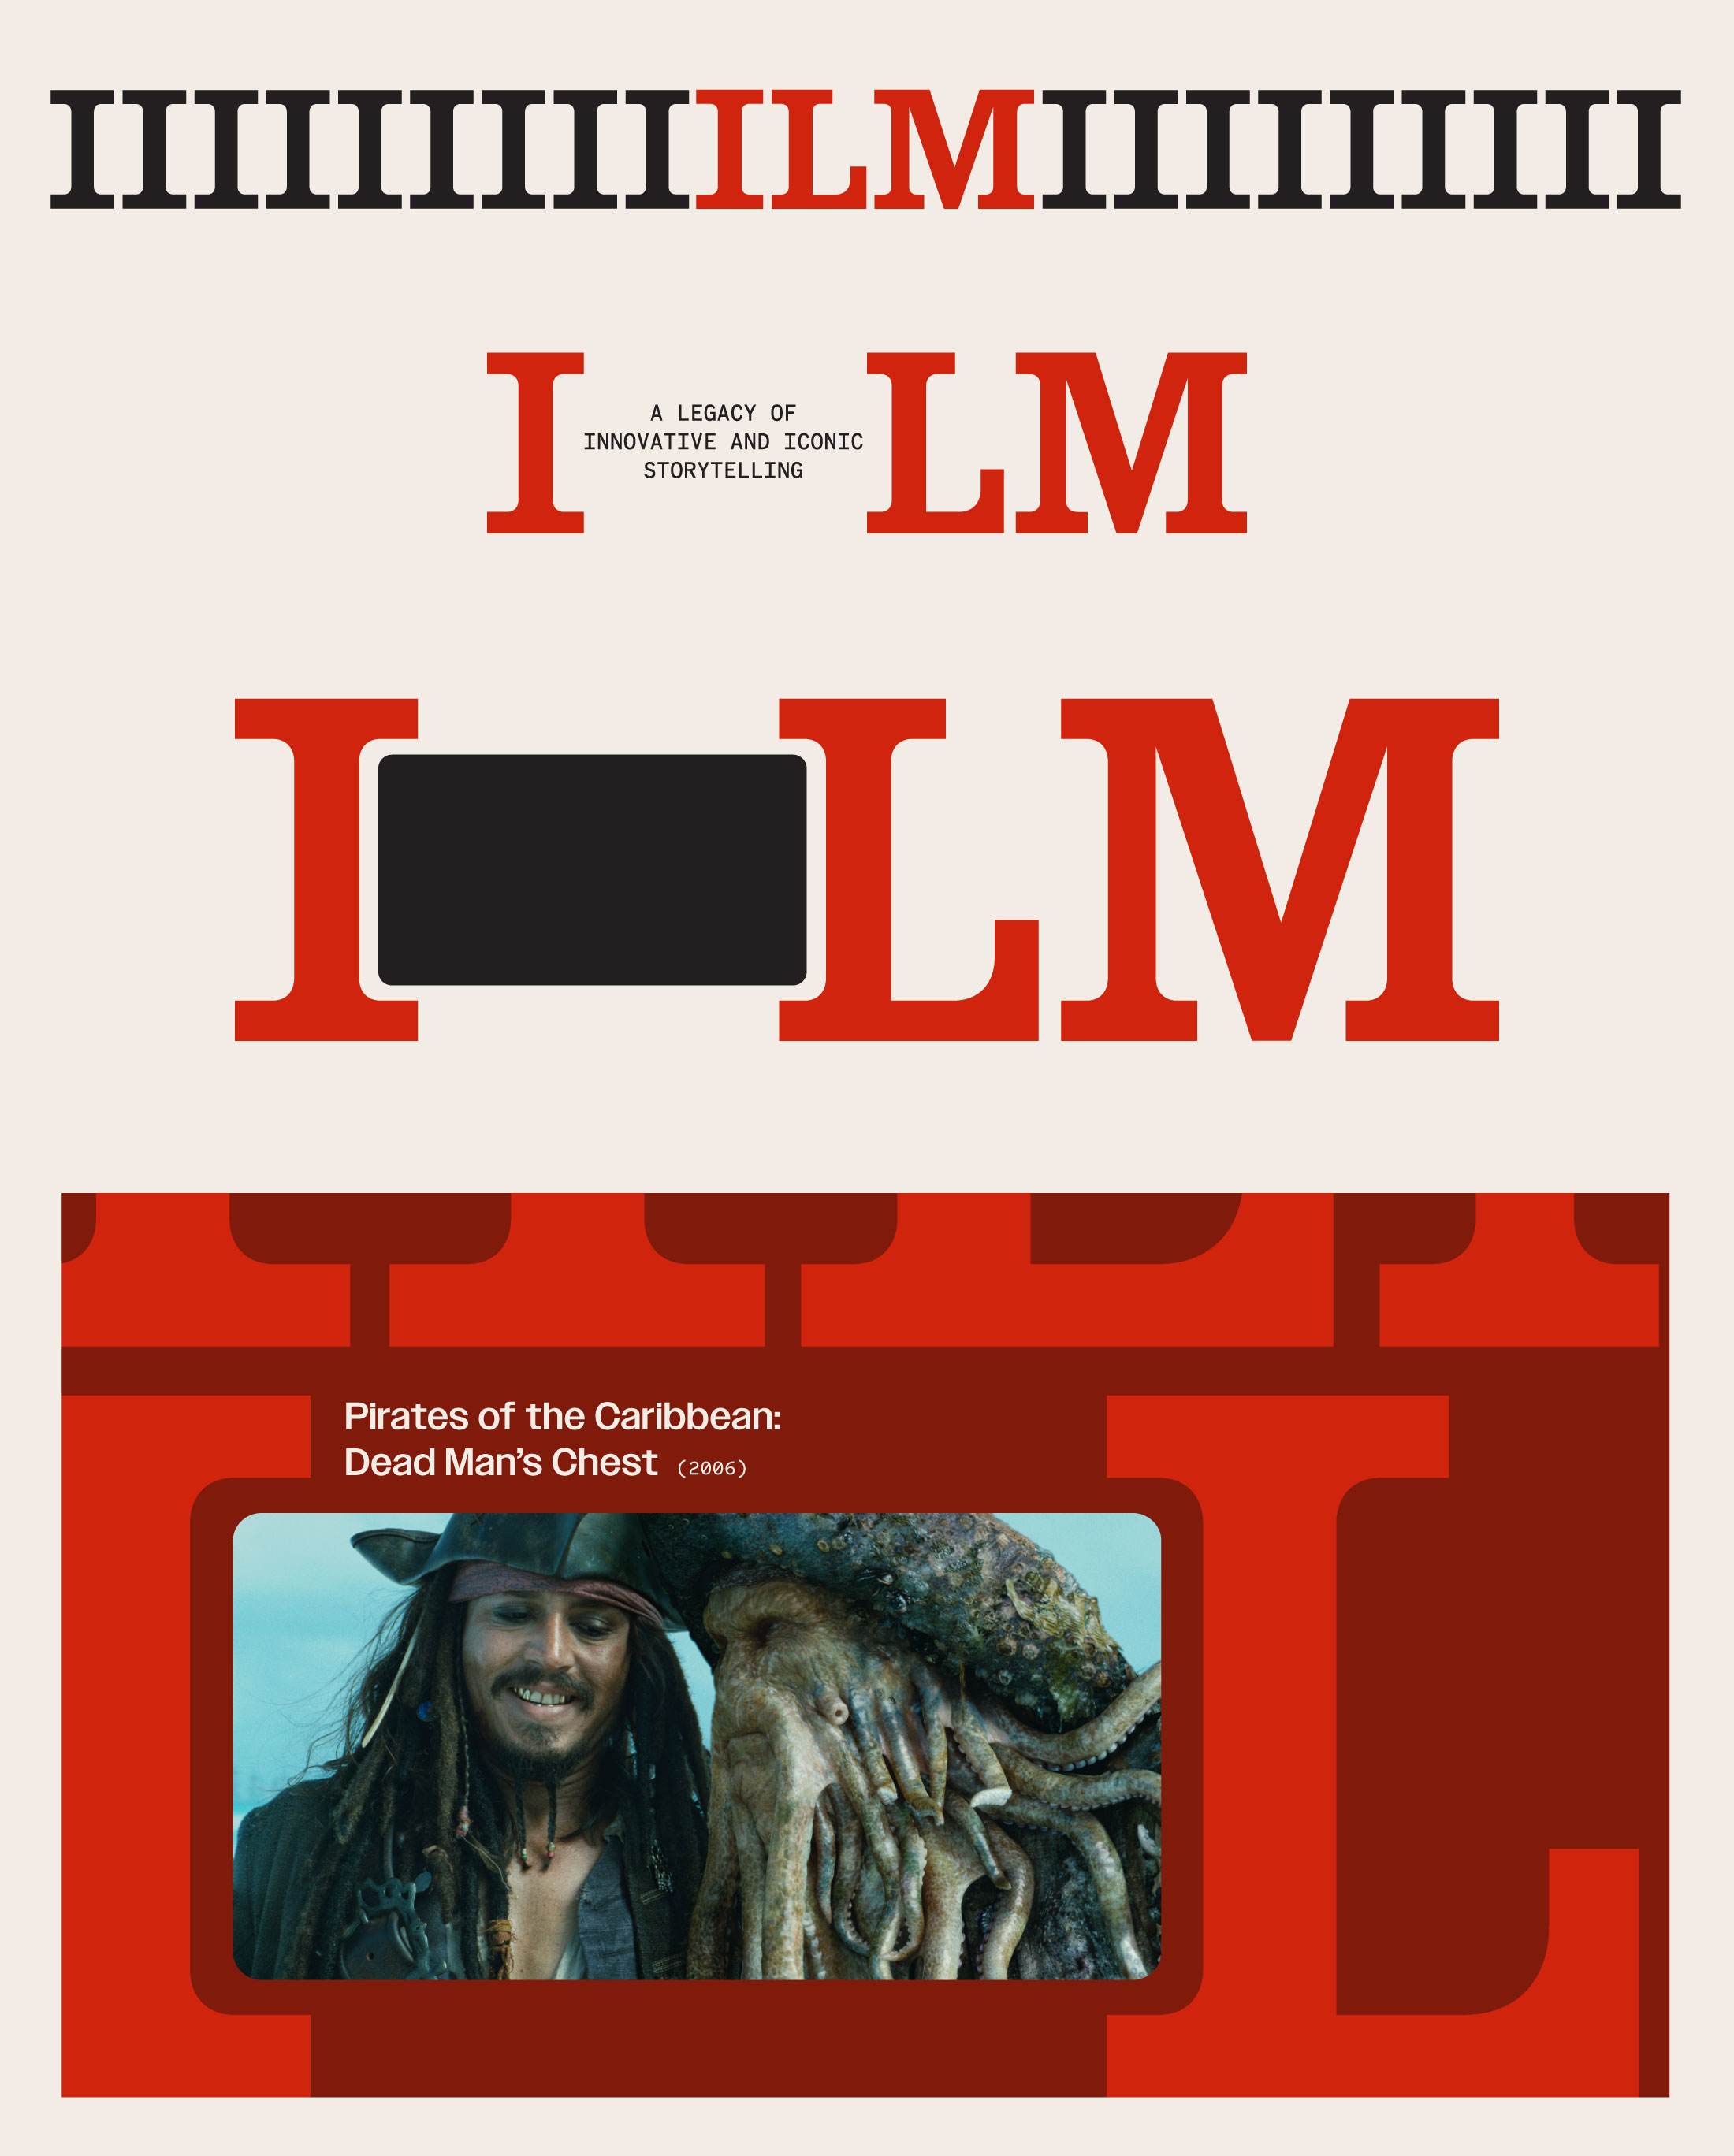 ILM as a framing device examples